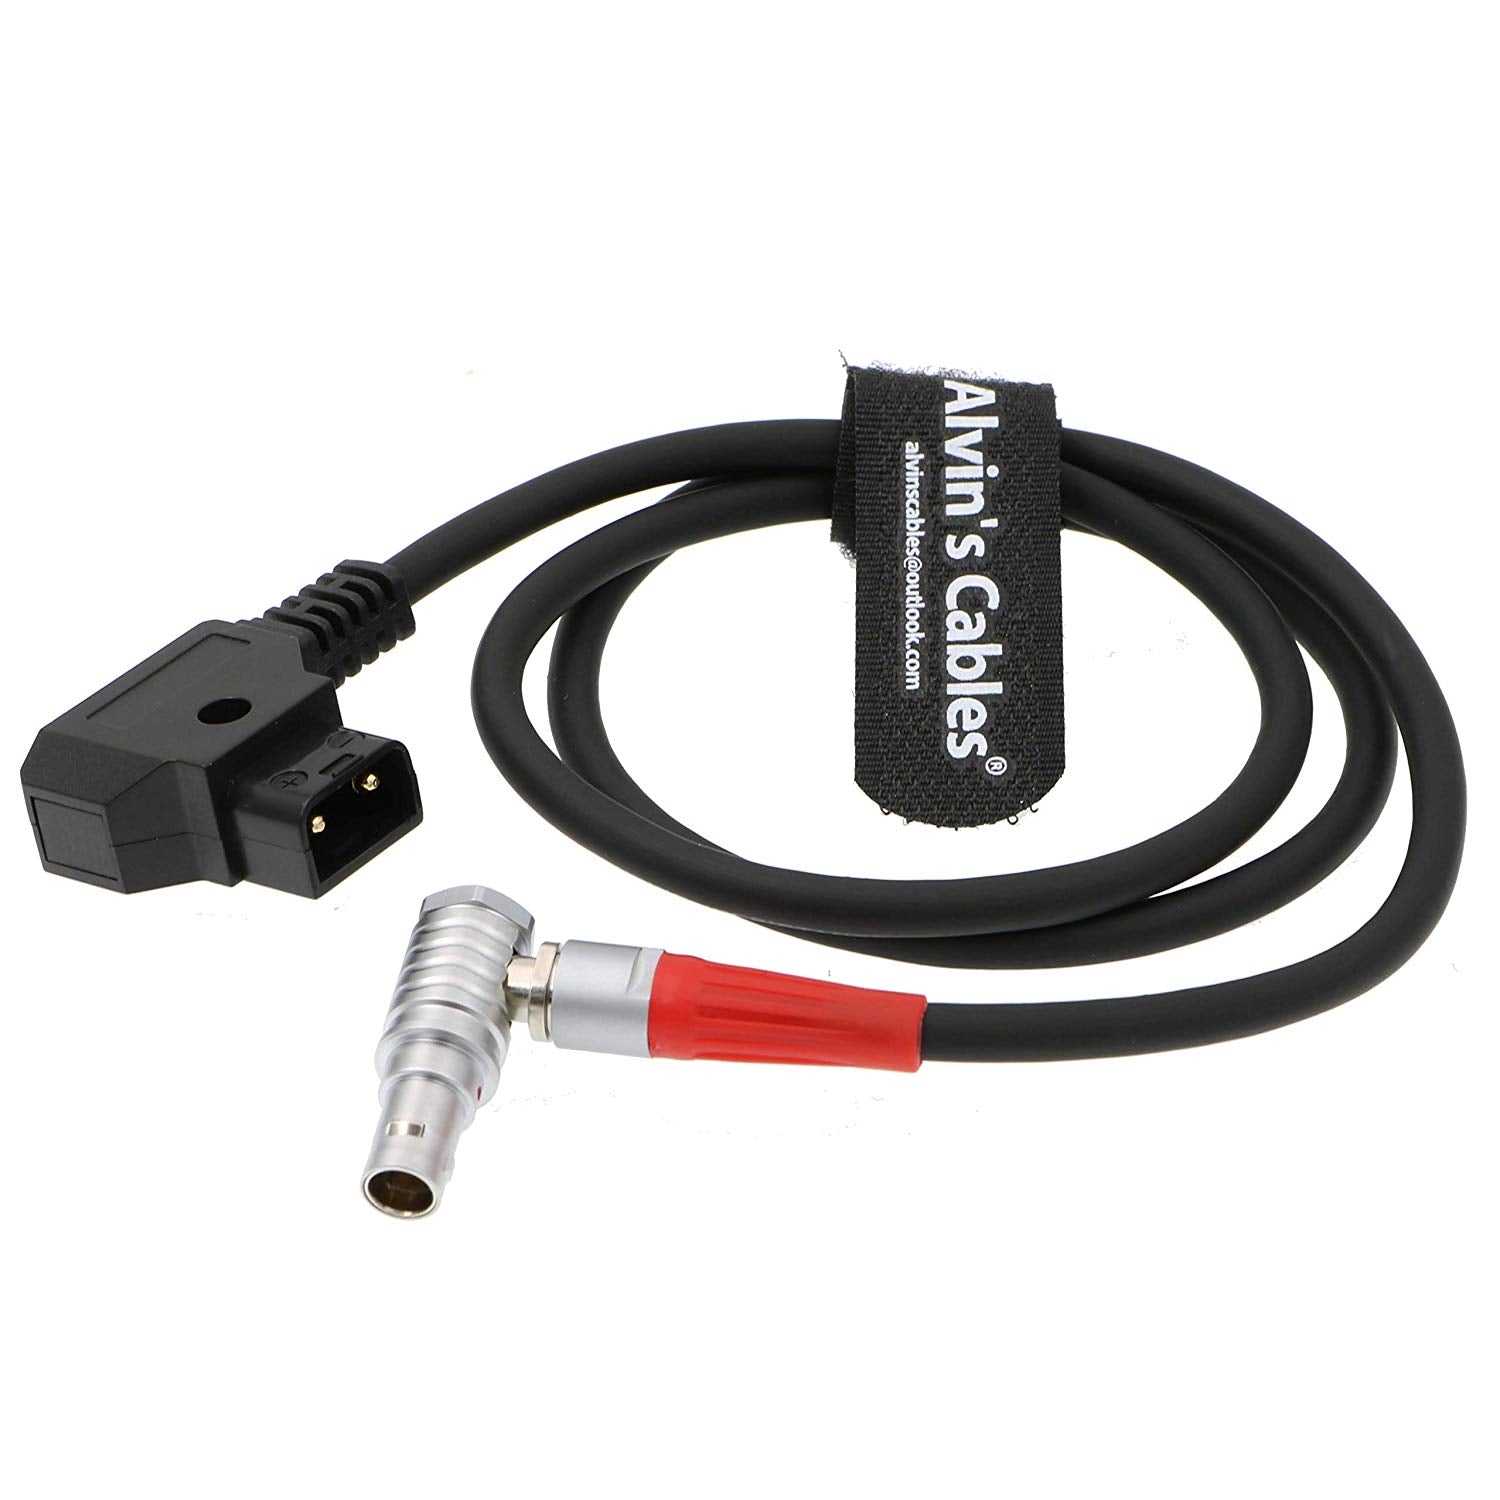 Alvin's Cables Zacuto Gratical Eye Viewfinder Power Cable 2 Pin Male Right Angle to D Tap